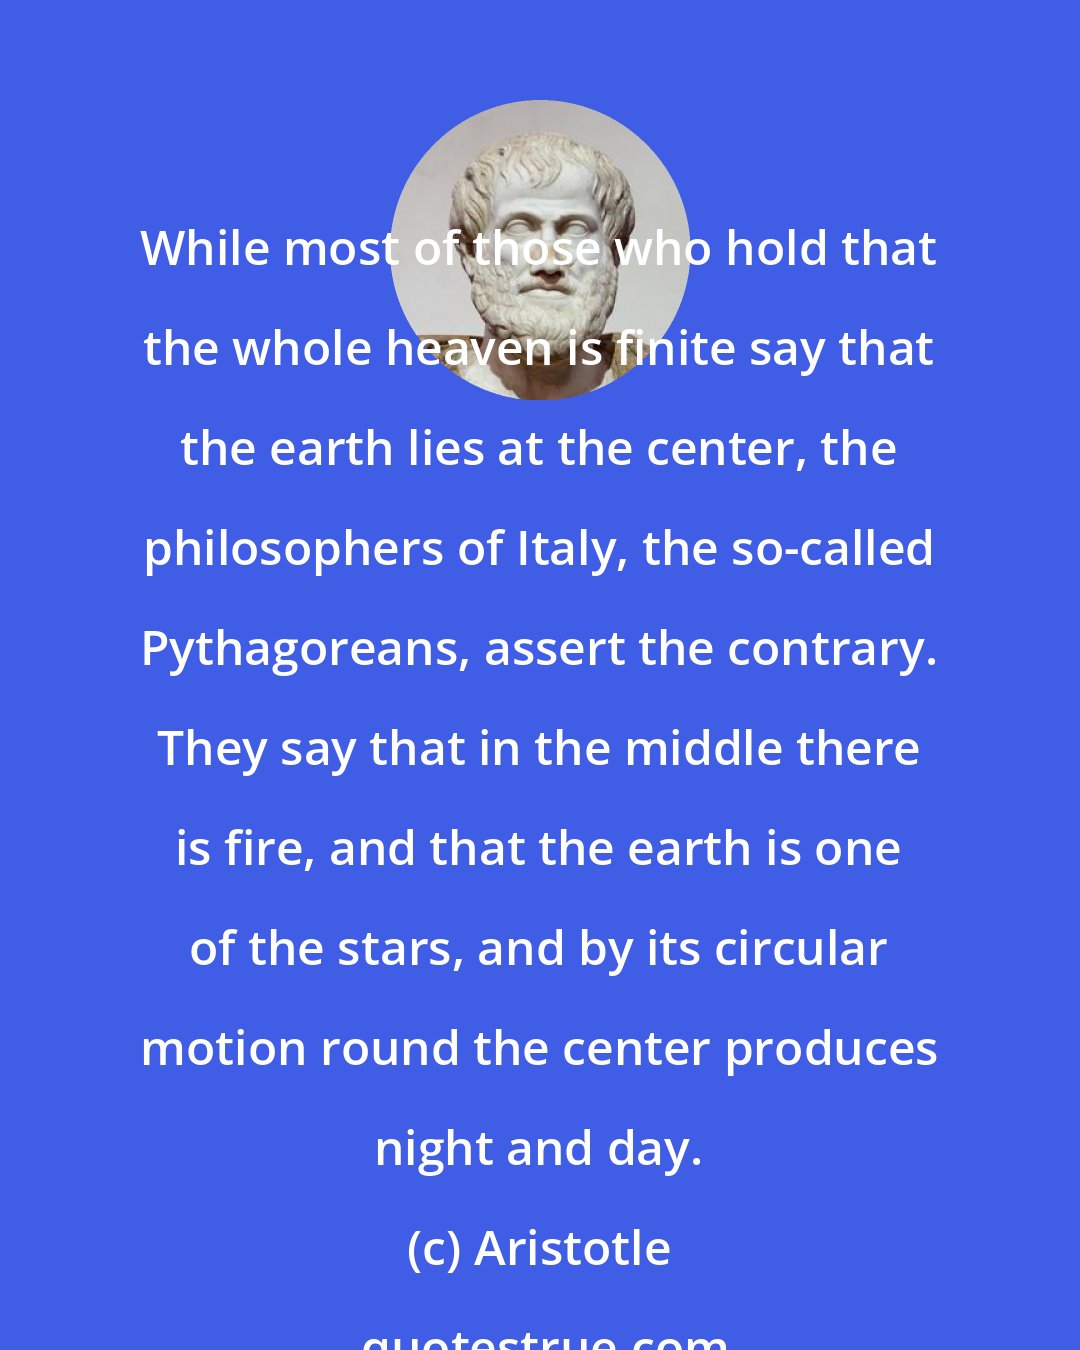 Aristotle: While most of those who hold that the whole heaven is finite say that the earth lies at the center, the philosophers of Italy, the so-called Pythagoreans, assert the contrary. They say that in the middle there is fire, and that the earth is one of the stars, and by its circular motion round the center produces night and day.